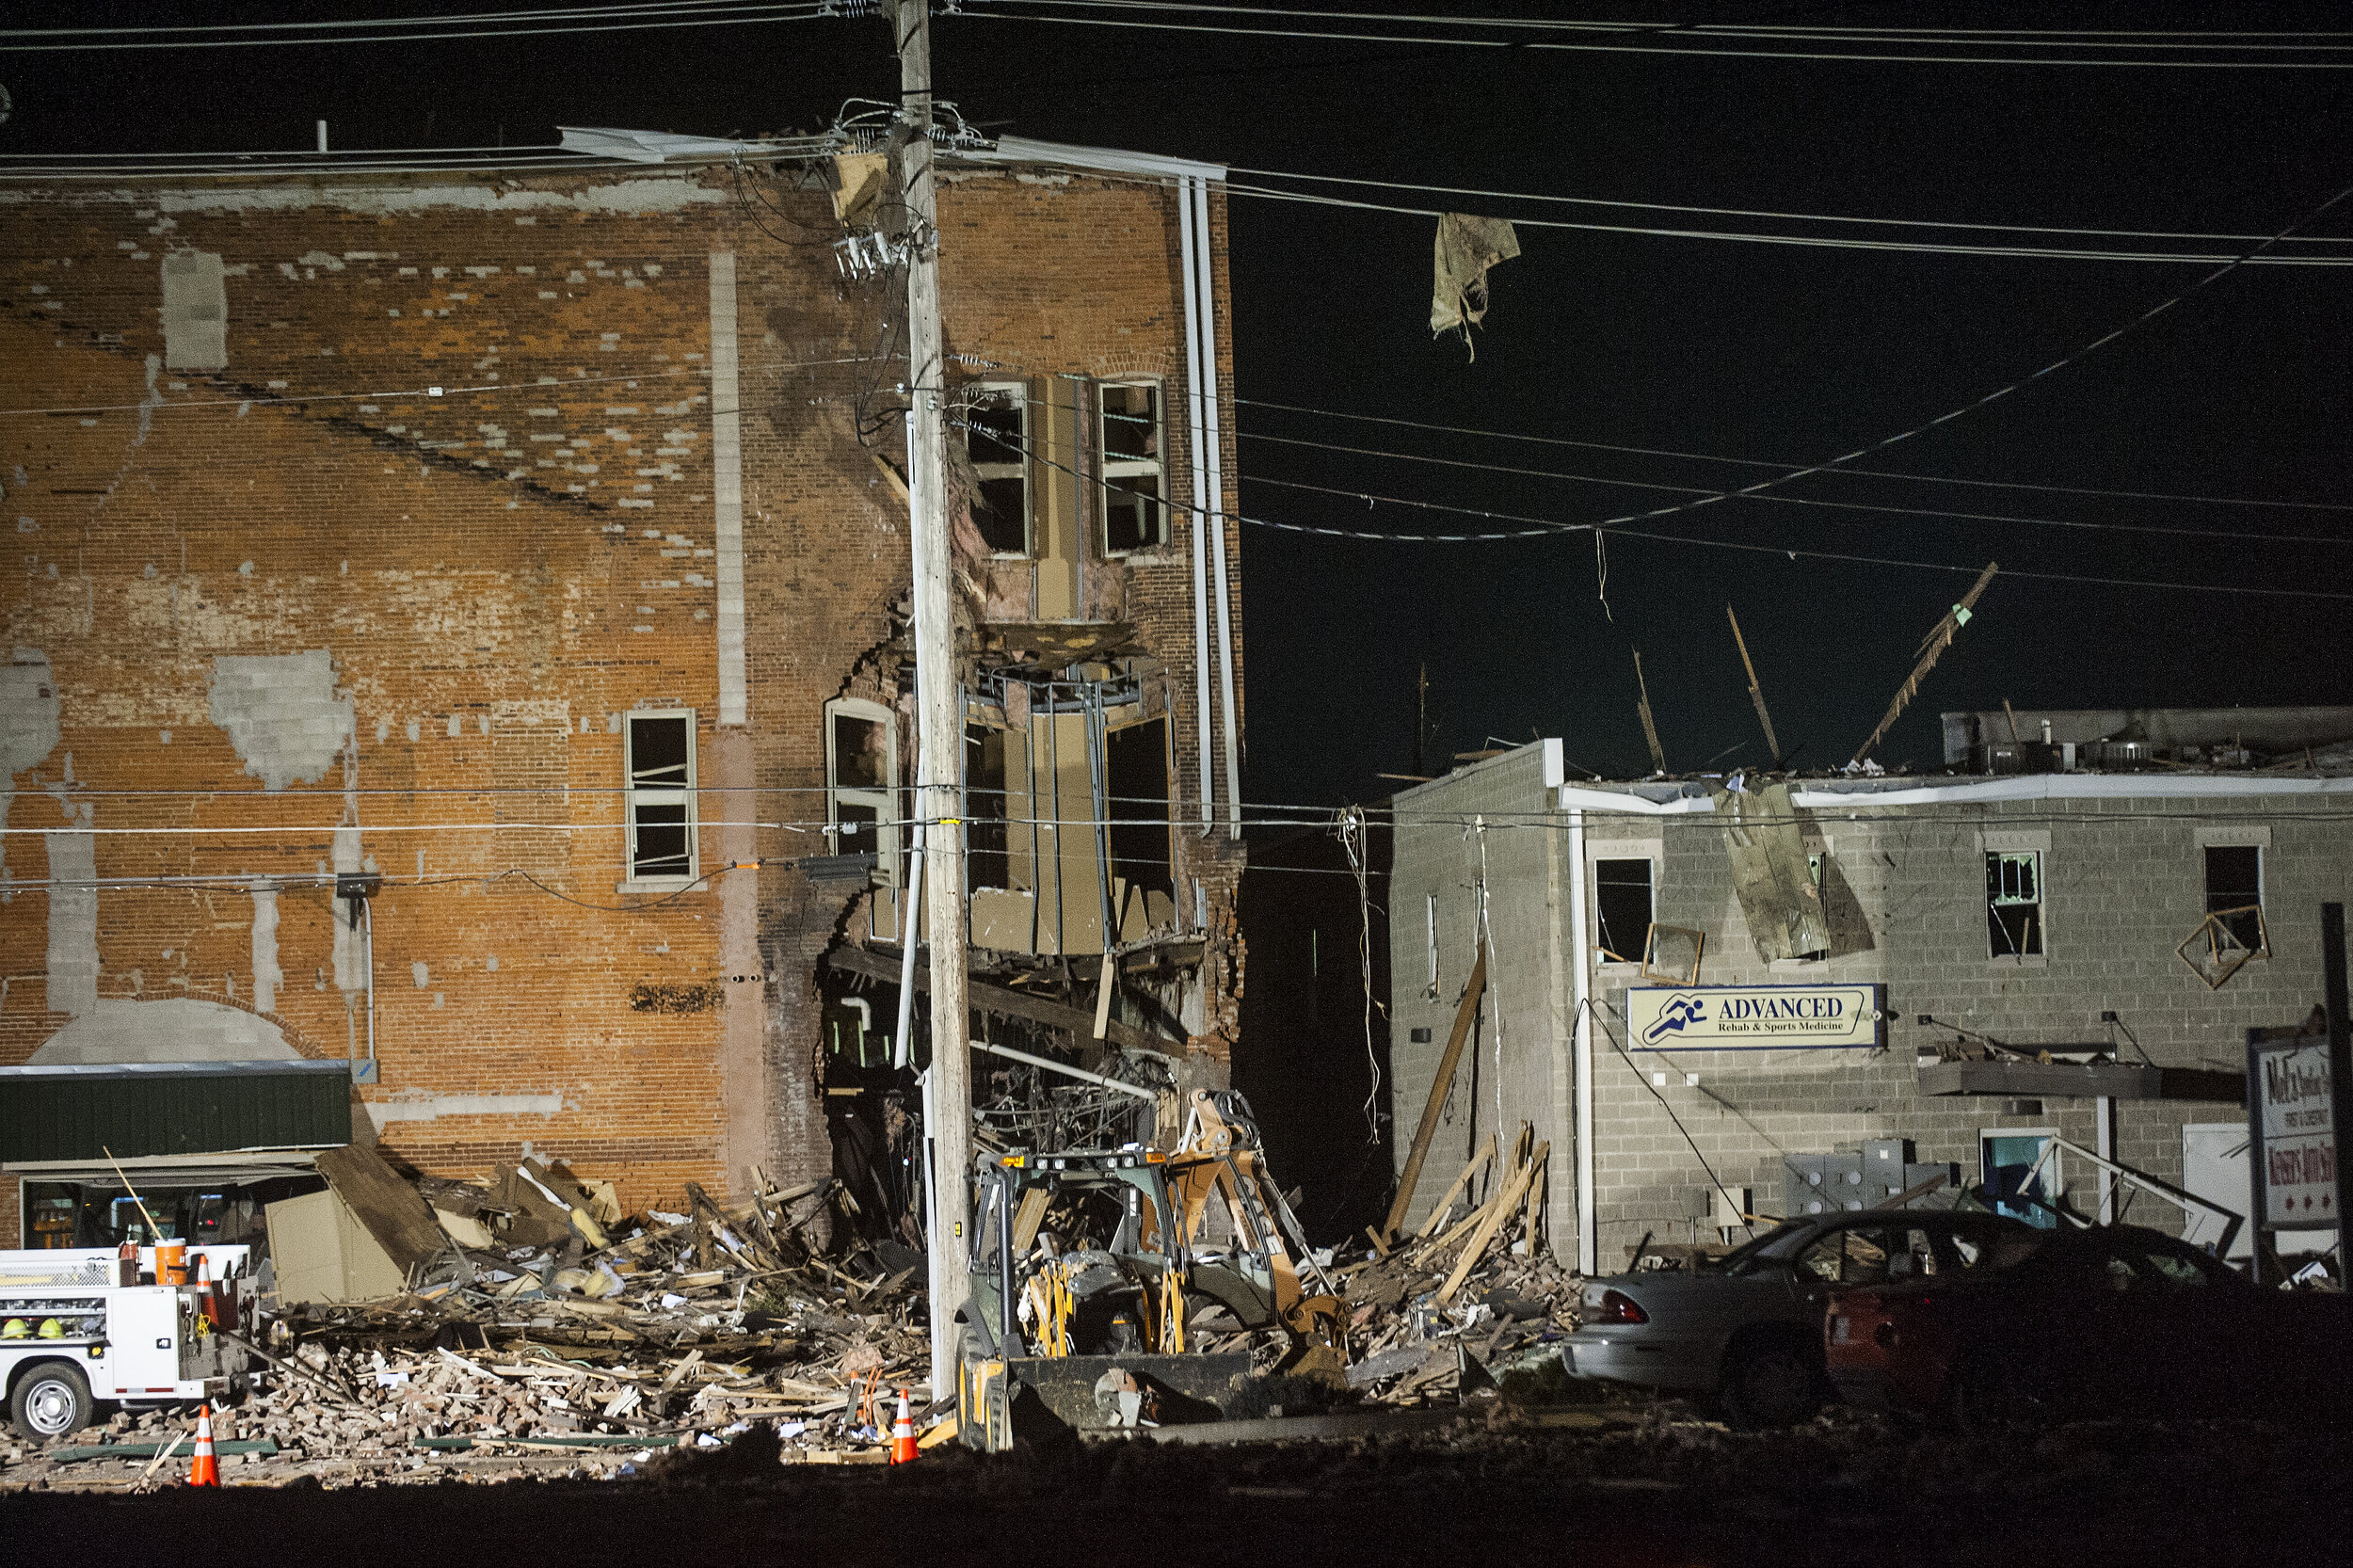  Damage done from a natural gas explosion is shown Wednesday, Nov. 16, 2016, in Canton, Illinois. One person was killed and several others were injured. A crew with Ameren Illinois had been in the process of repairing a gas leak in the area prior to 